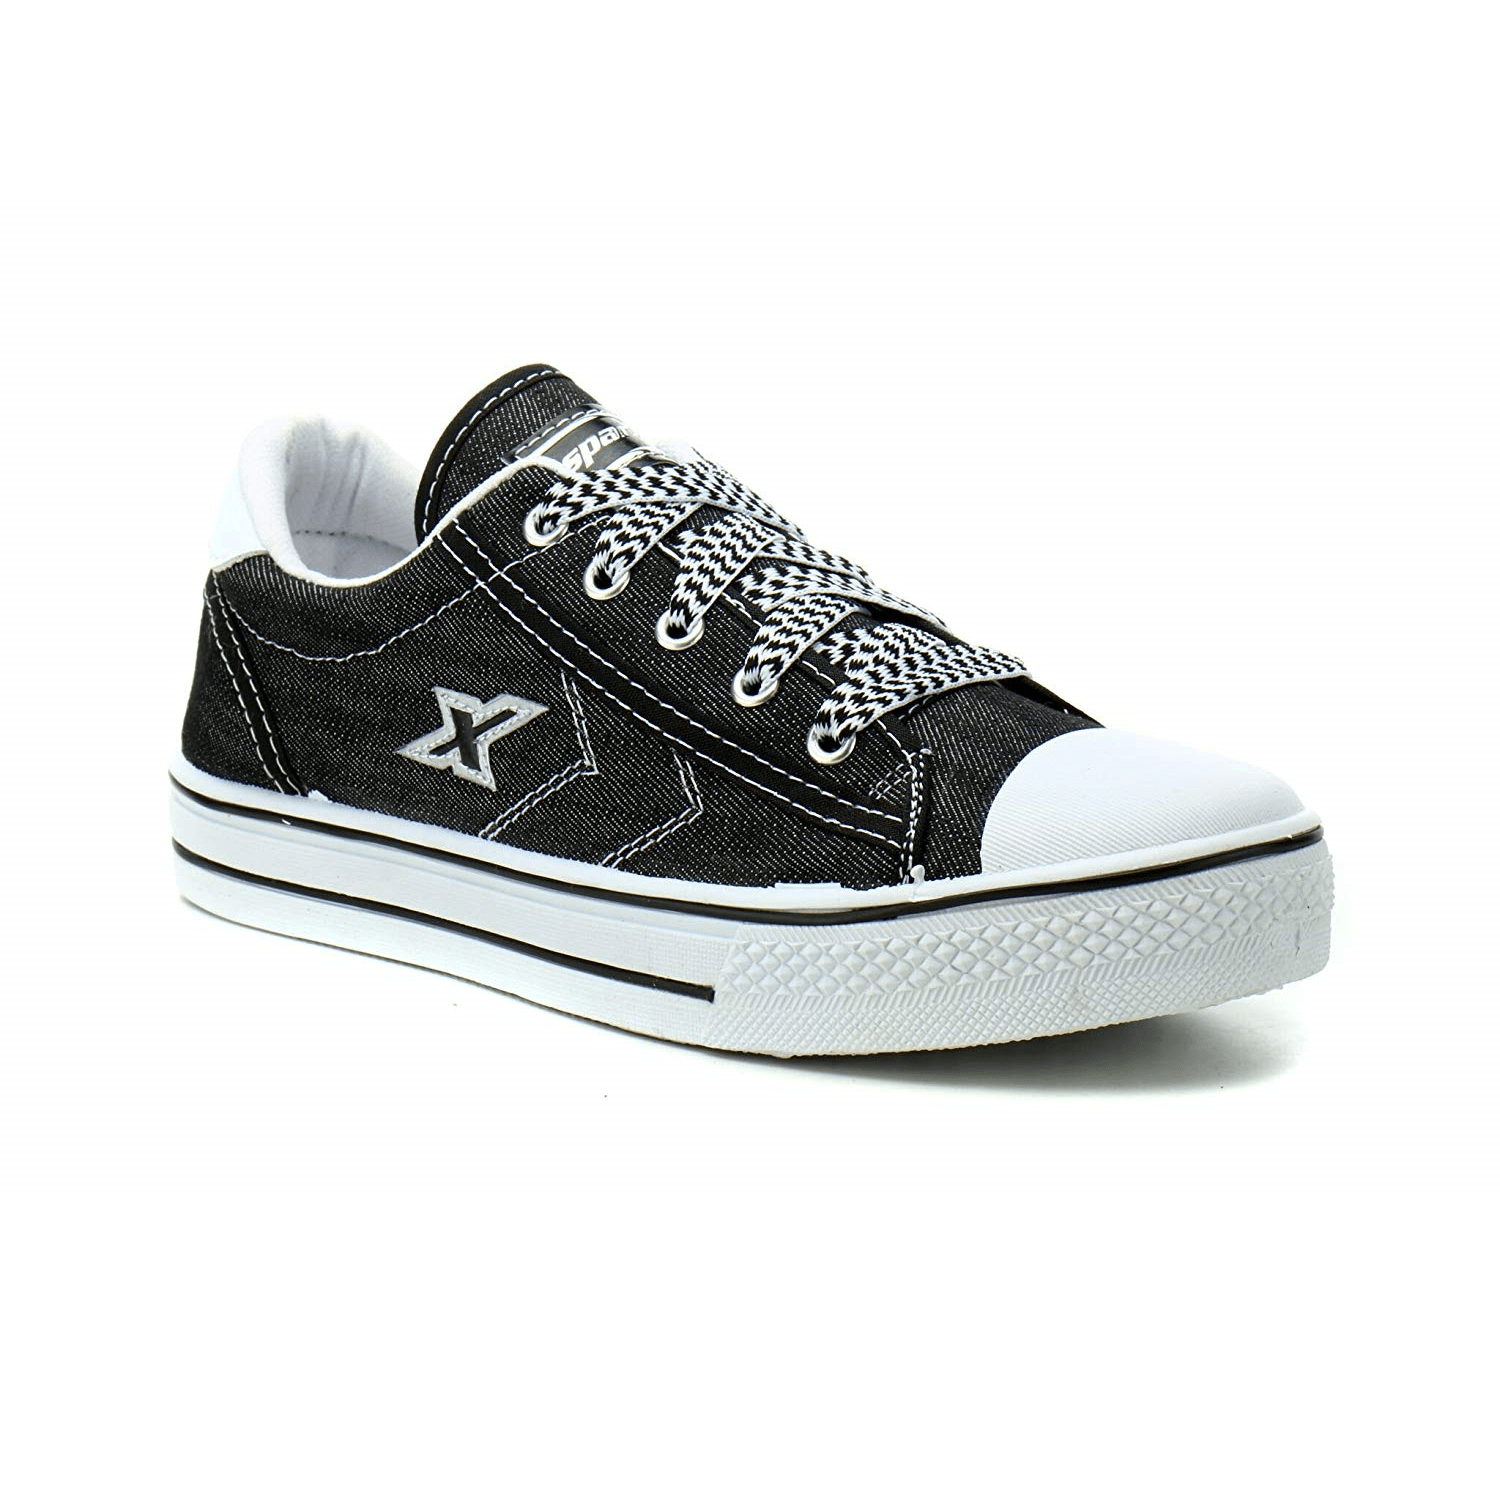 sparx shoes white and black